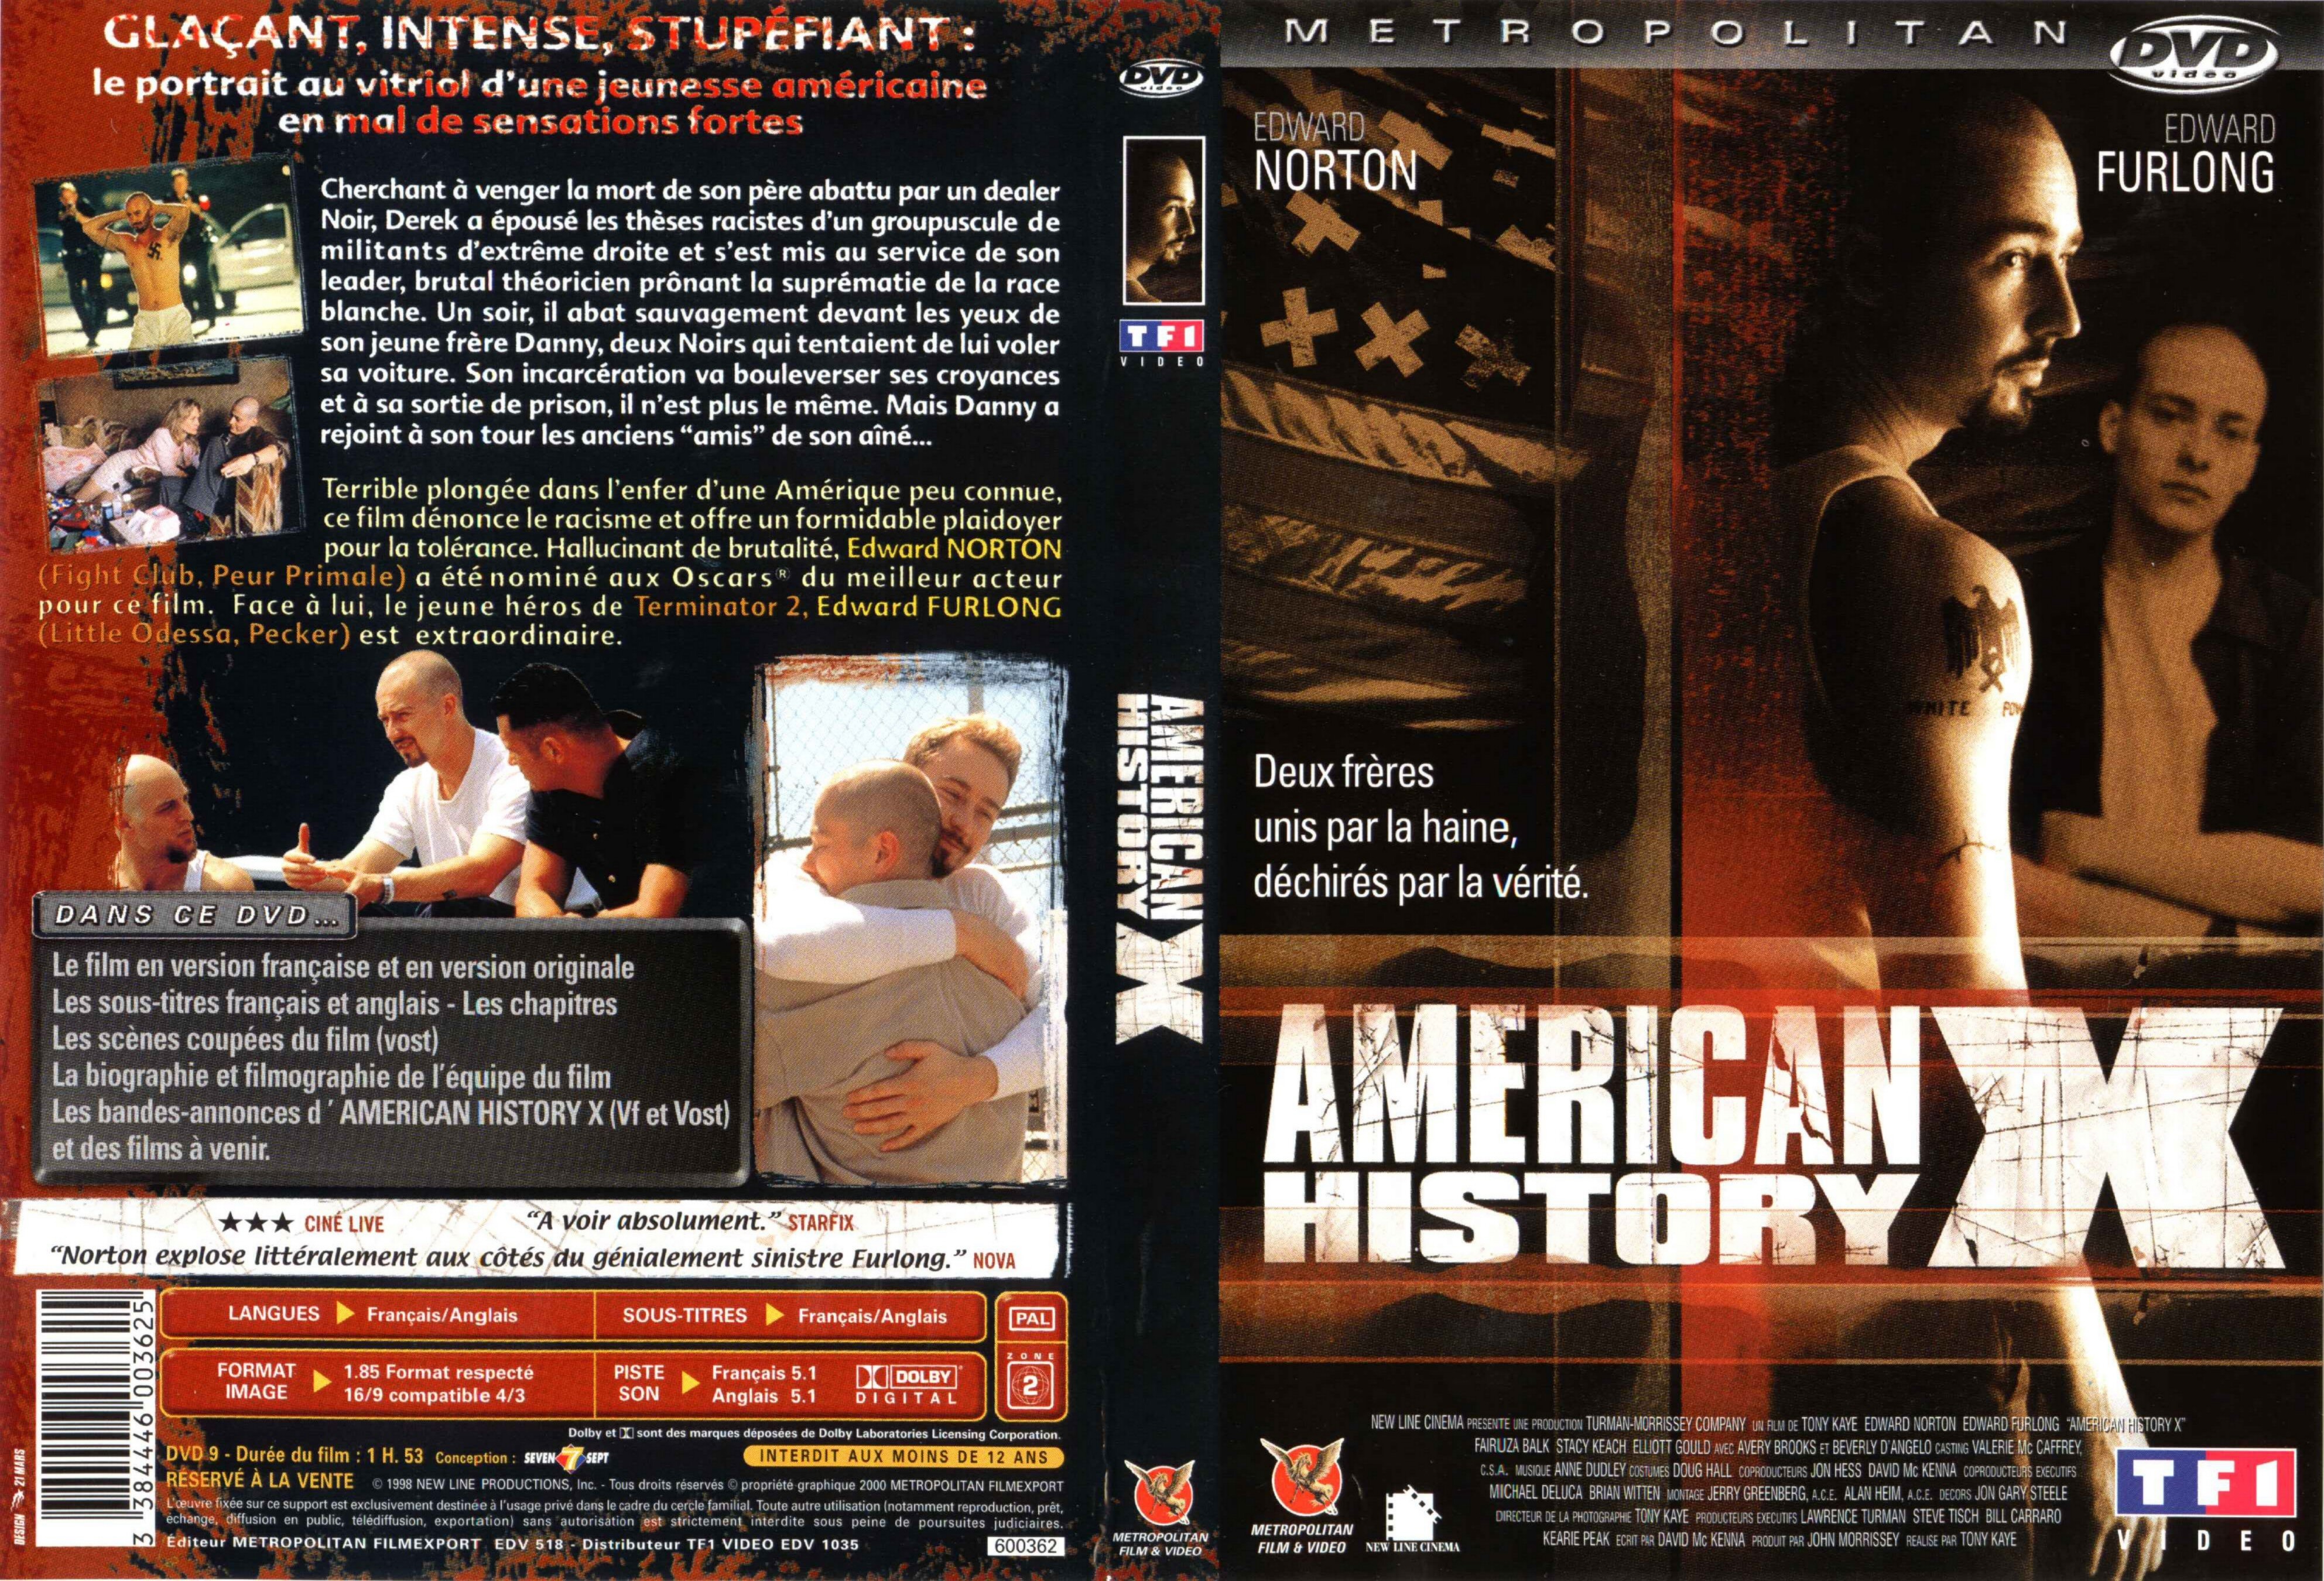 Jaquette DVD American history X